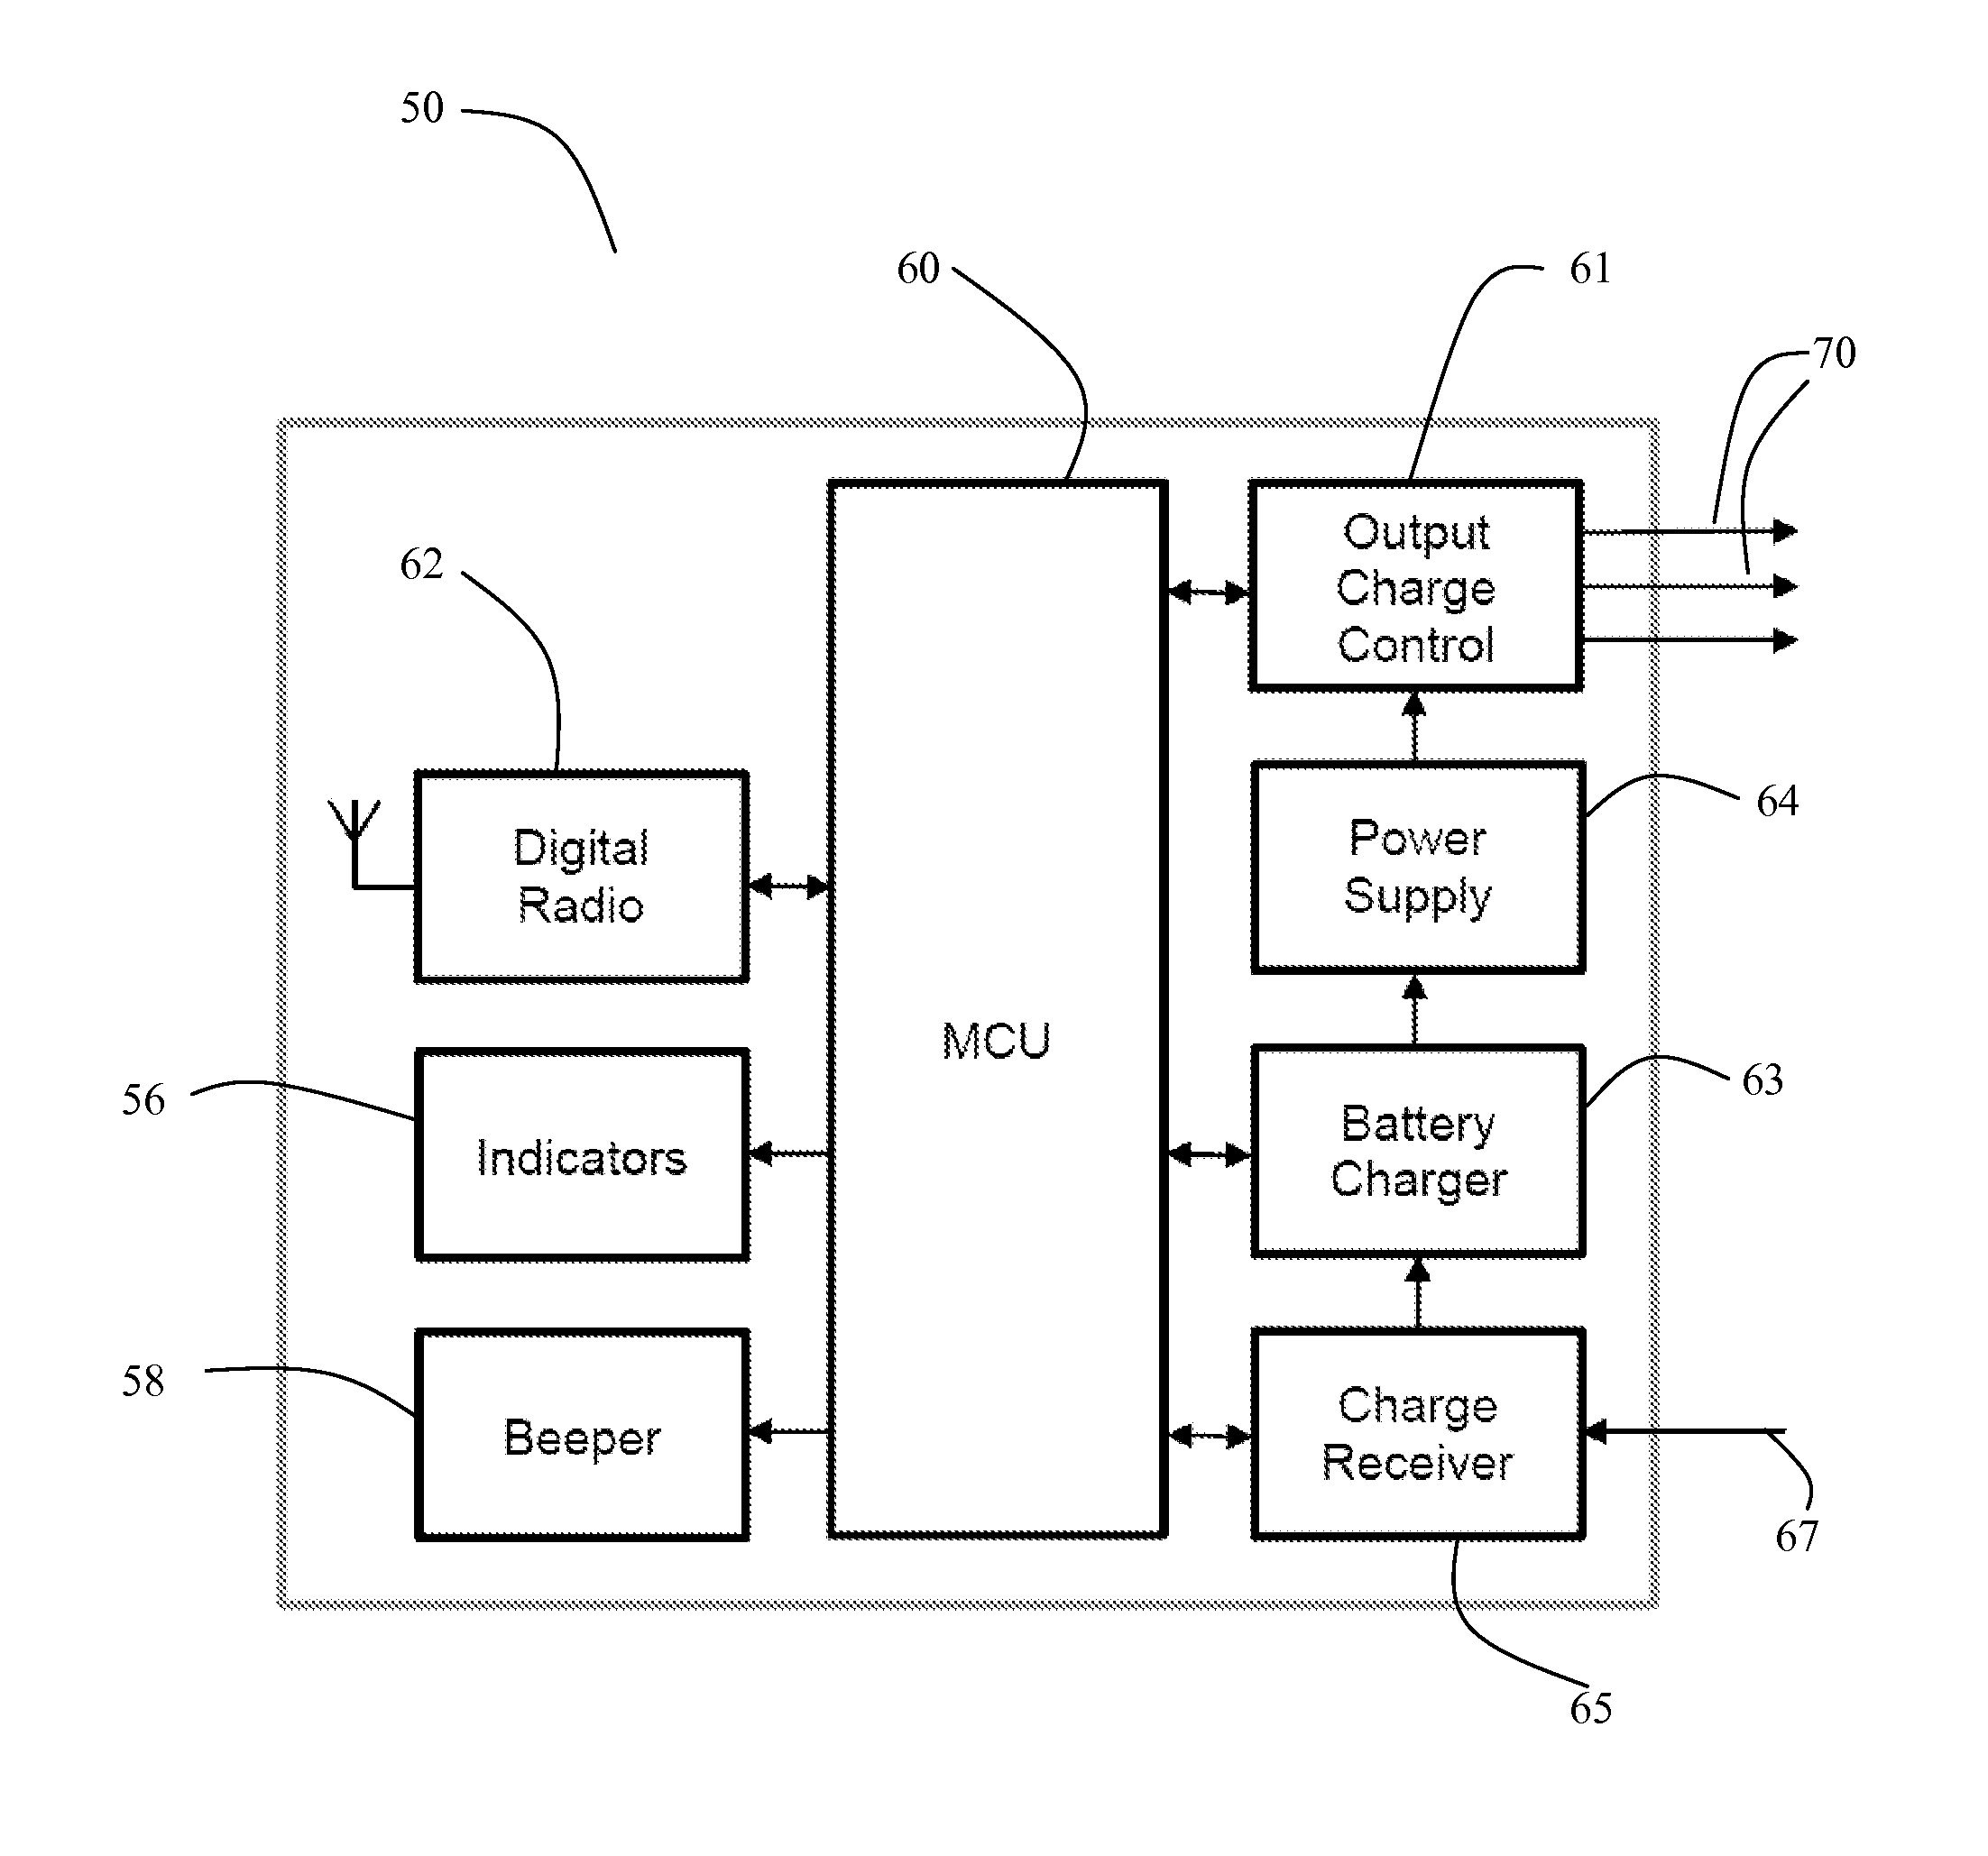 System and method for charging mobile devices at a venue